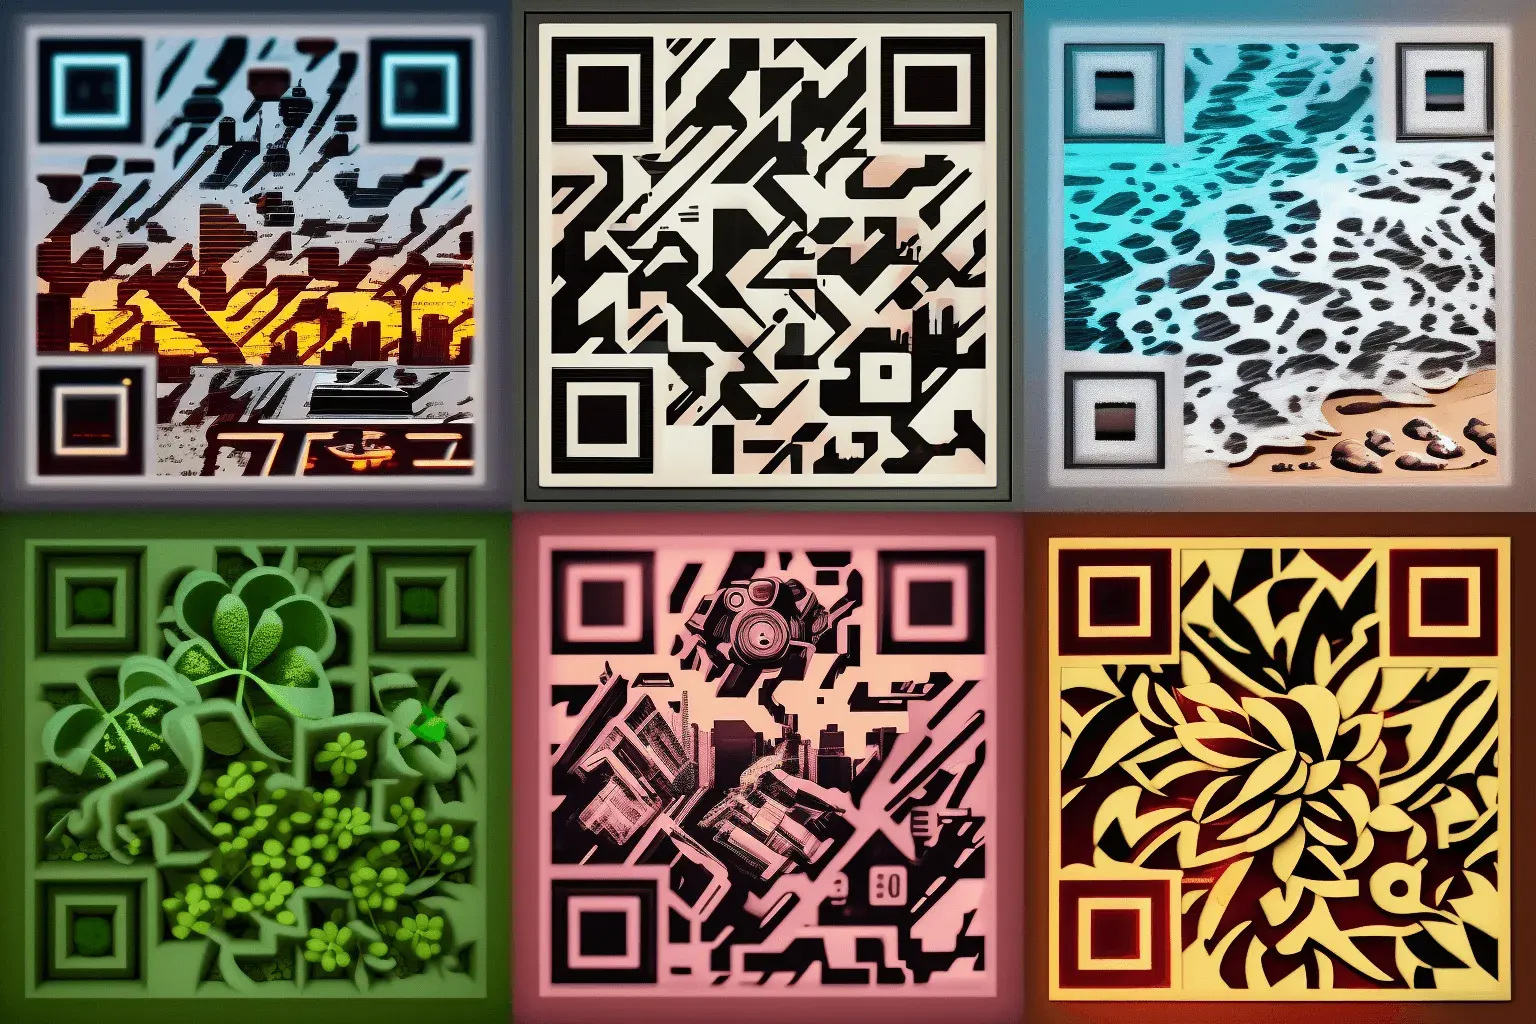 A grid of 6 AI generated QR codes that look like images